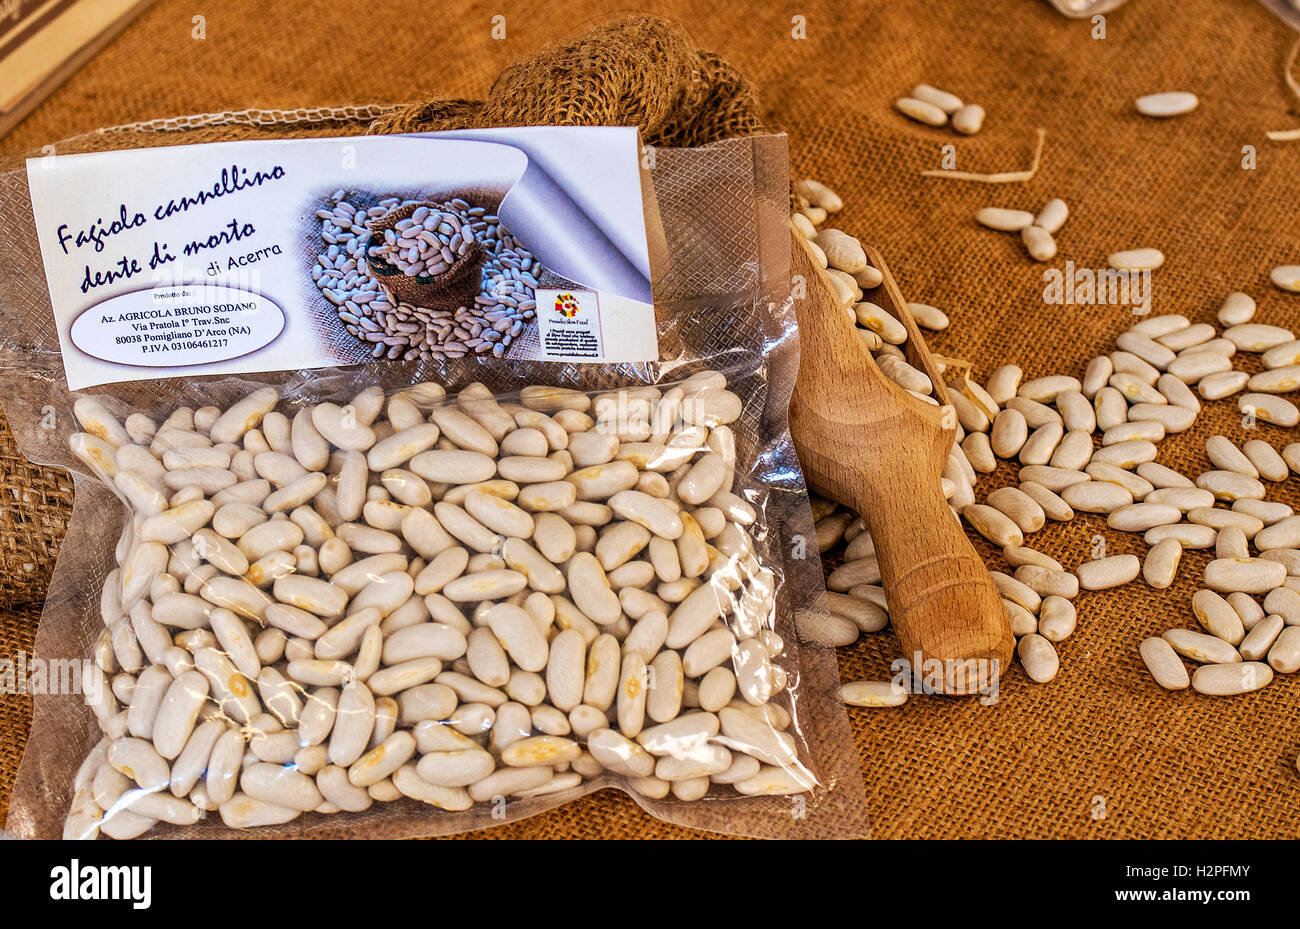 Italy Piedmont Turin ' Terra Madre - Salone del Gusto 2016 -Bean, tooth died of Acerra Stock Photo